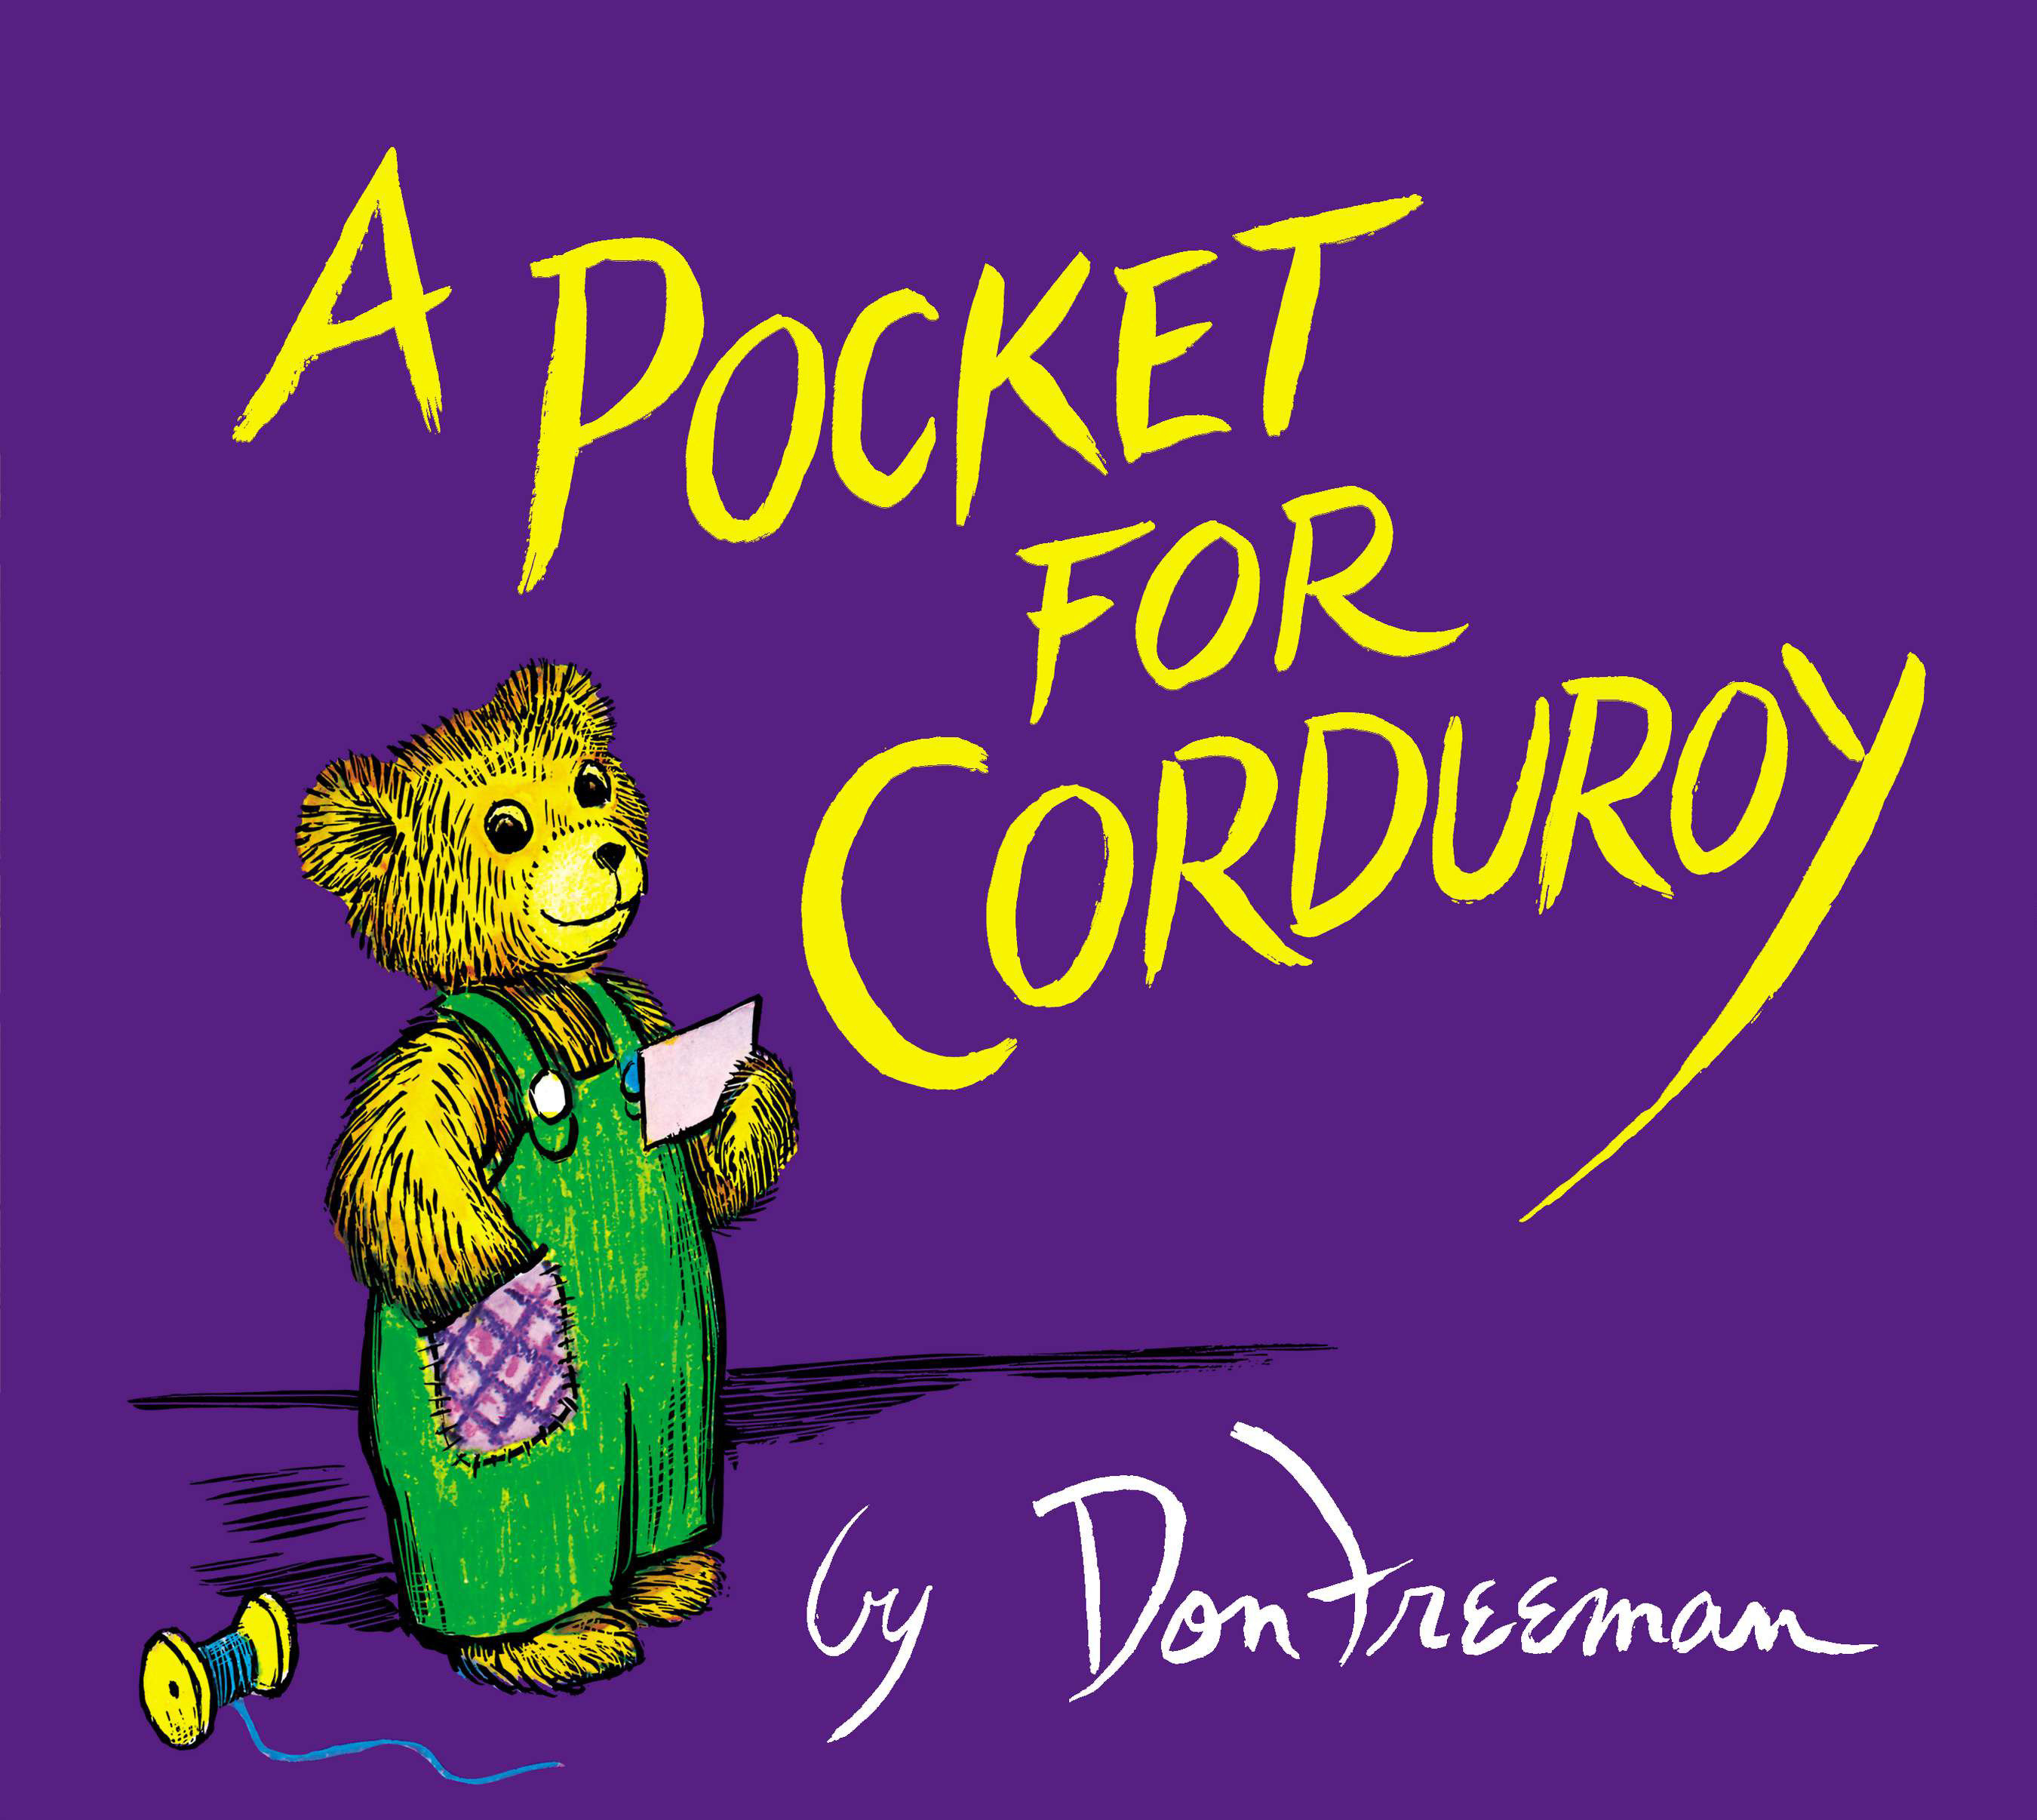 A Pocket for Corduroy (Hardcover Book)